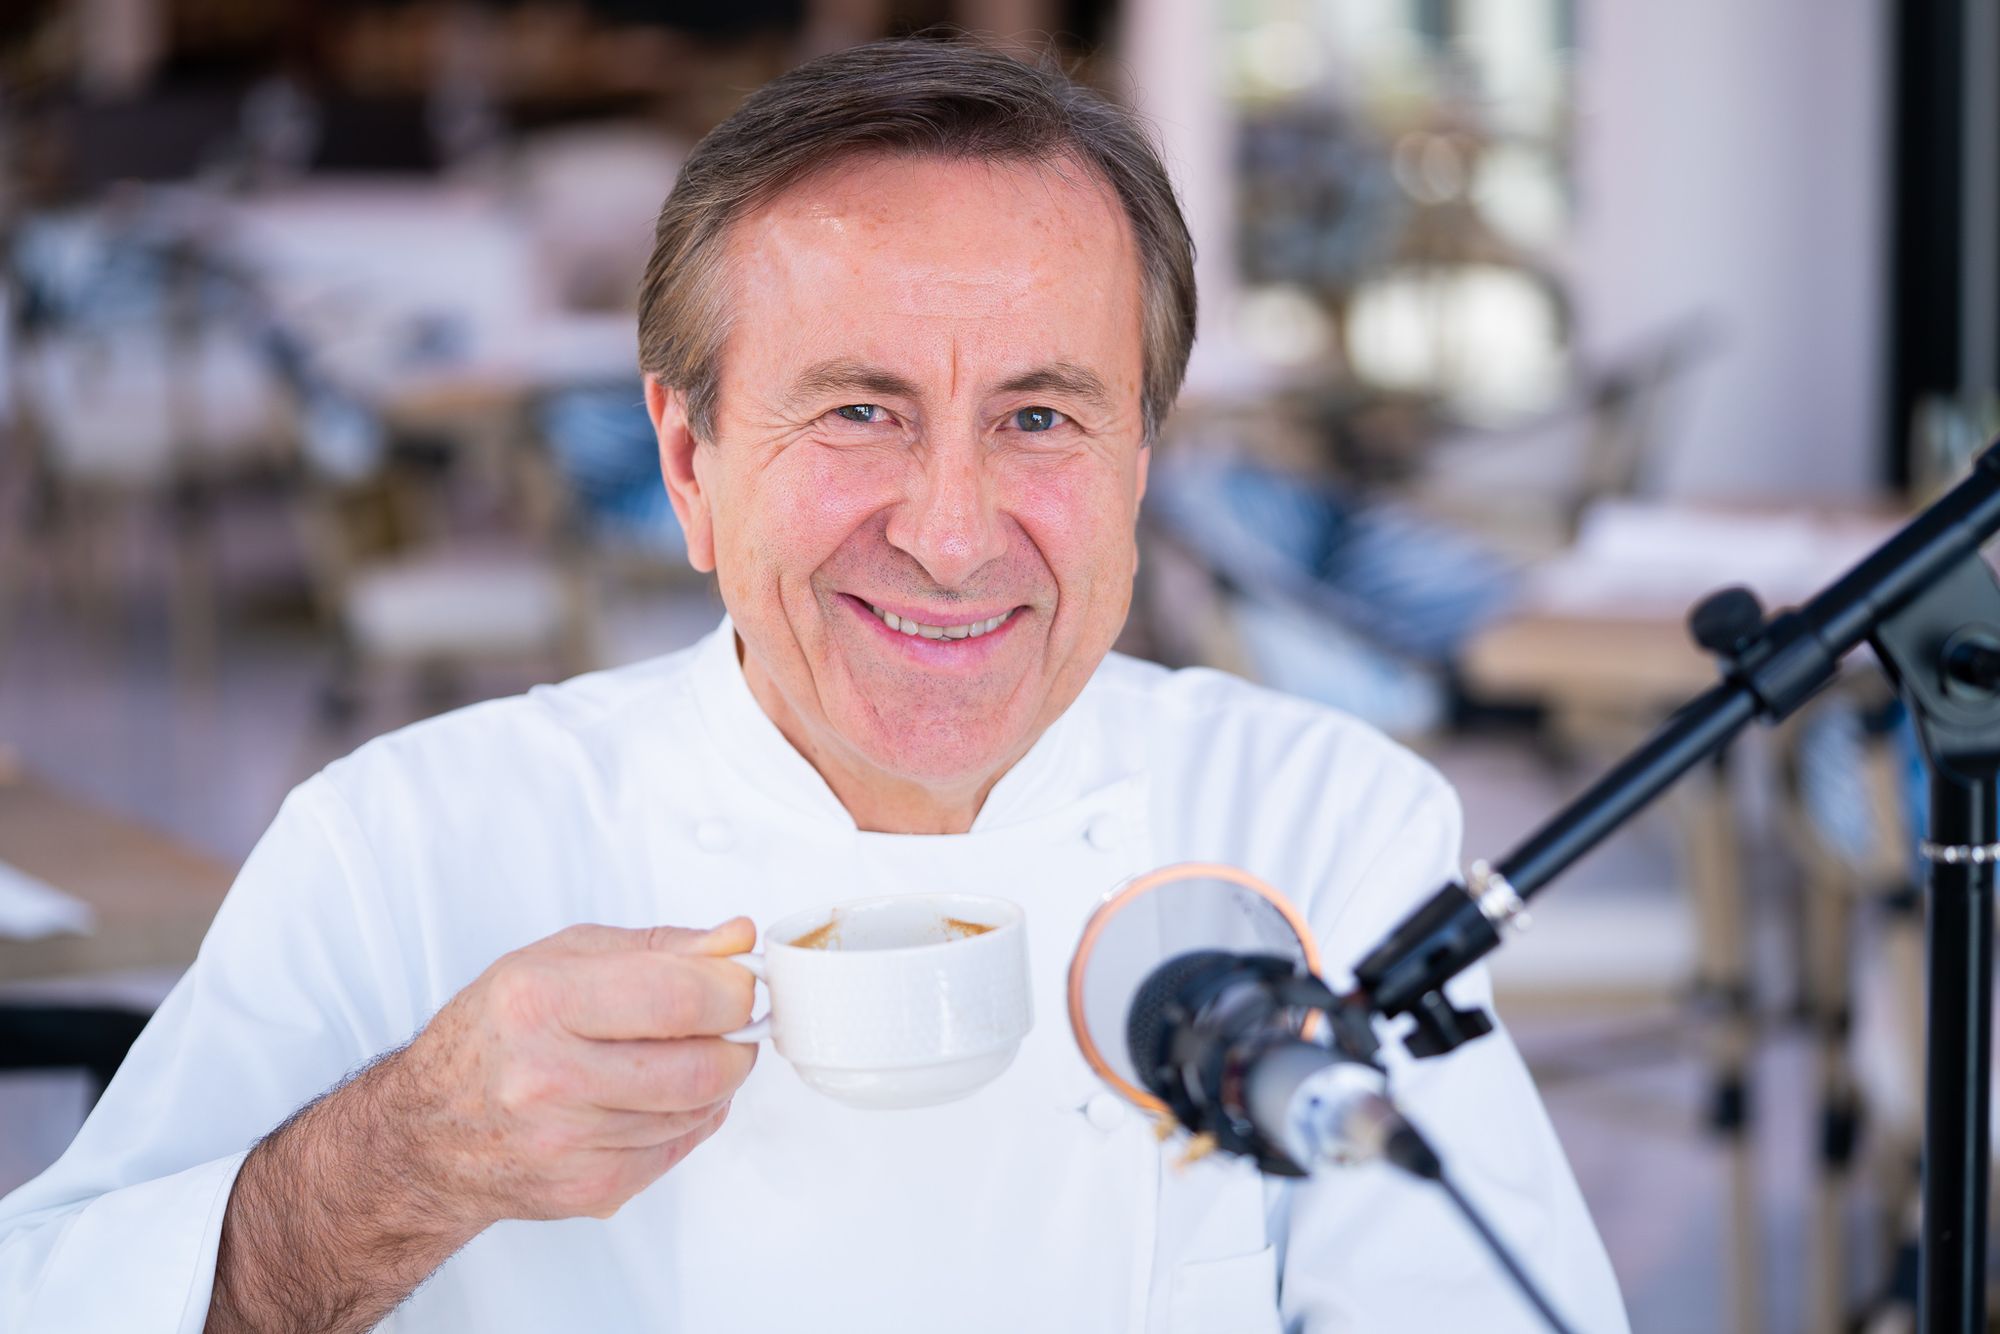 ‘Gear your life towards more than one legacy,’ Michelin Star Chef Daniel Boulud on wearing multiple hats to turbocharge a successful multi-decade career